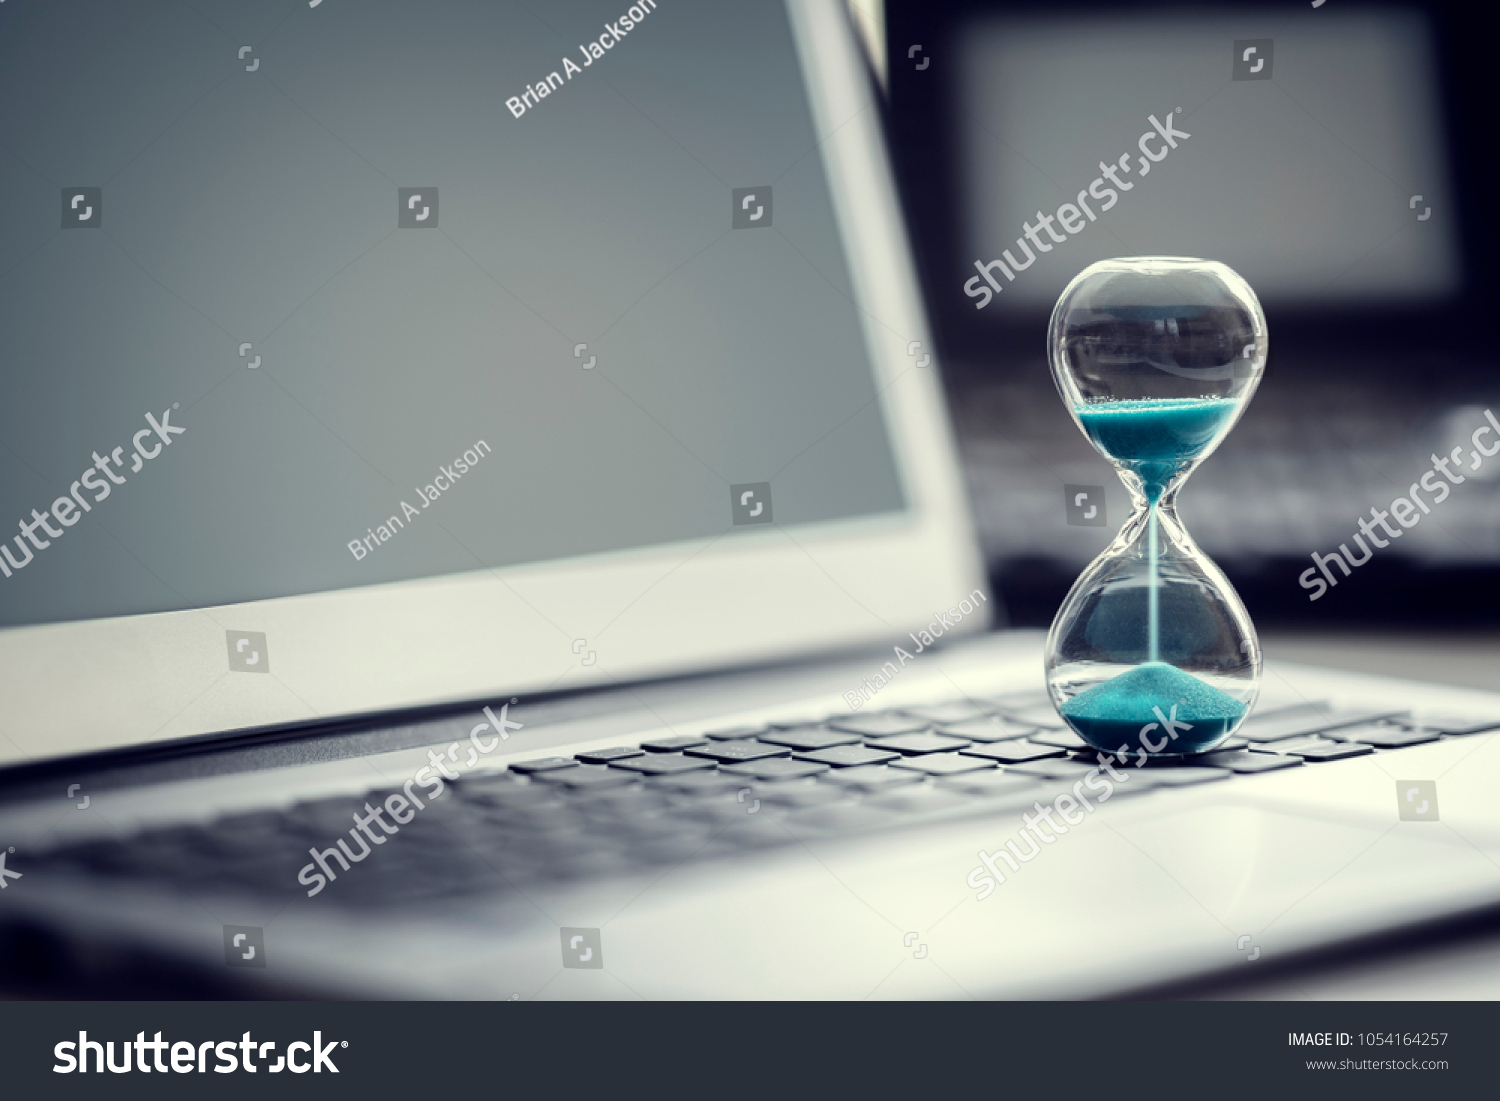 Hourglass on laptop computer concept for time management and countdown to deadline #1054164257